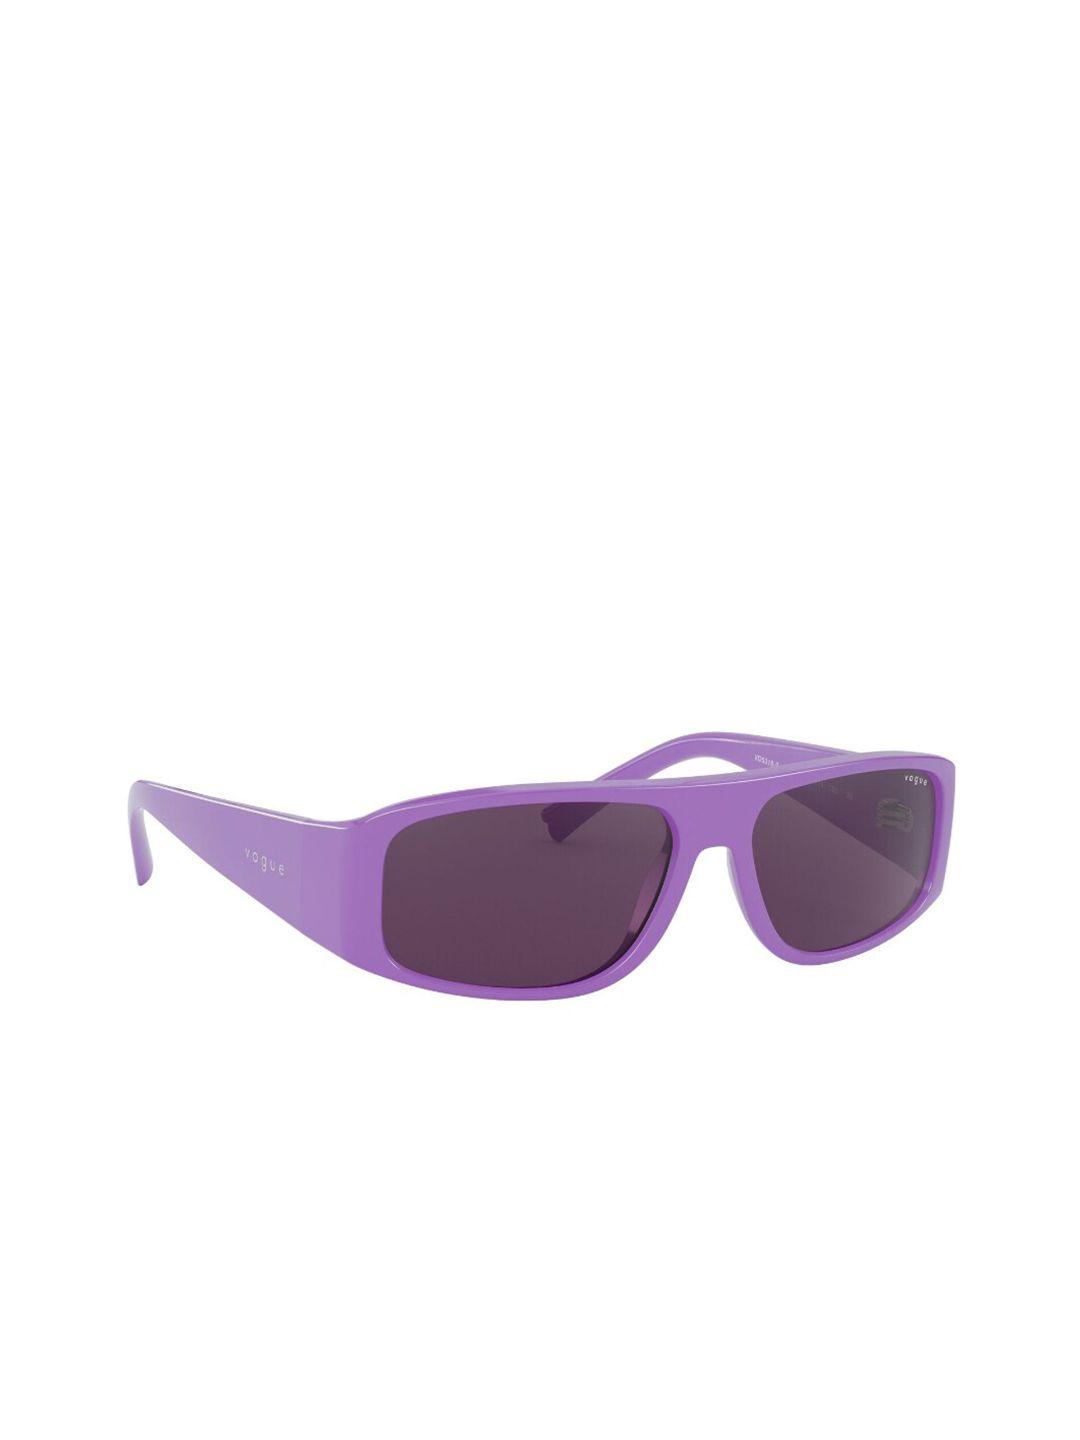 vogue women rectangle sunglasses with uv protected lens